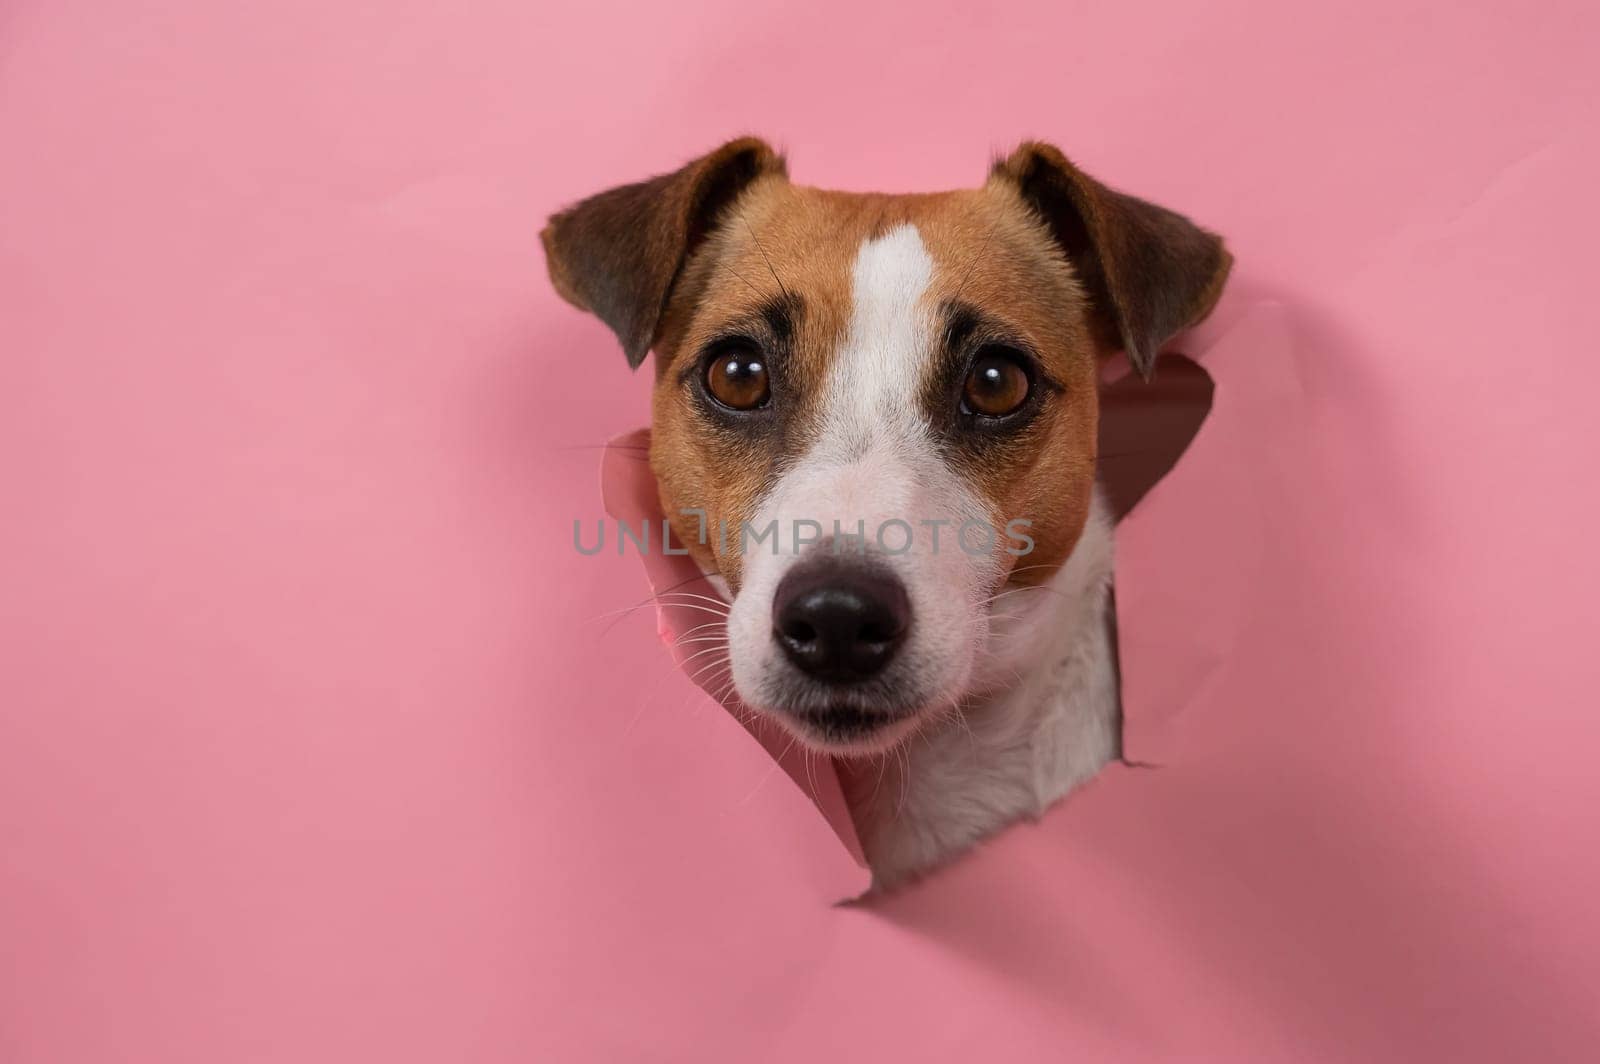 Funny dog jack russell terrier tore pink paper background